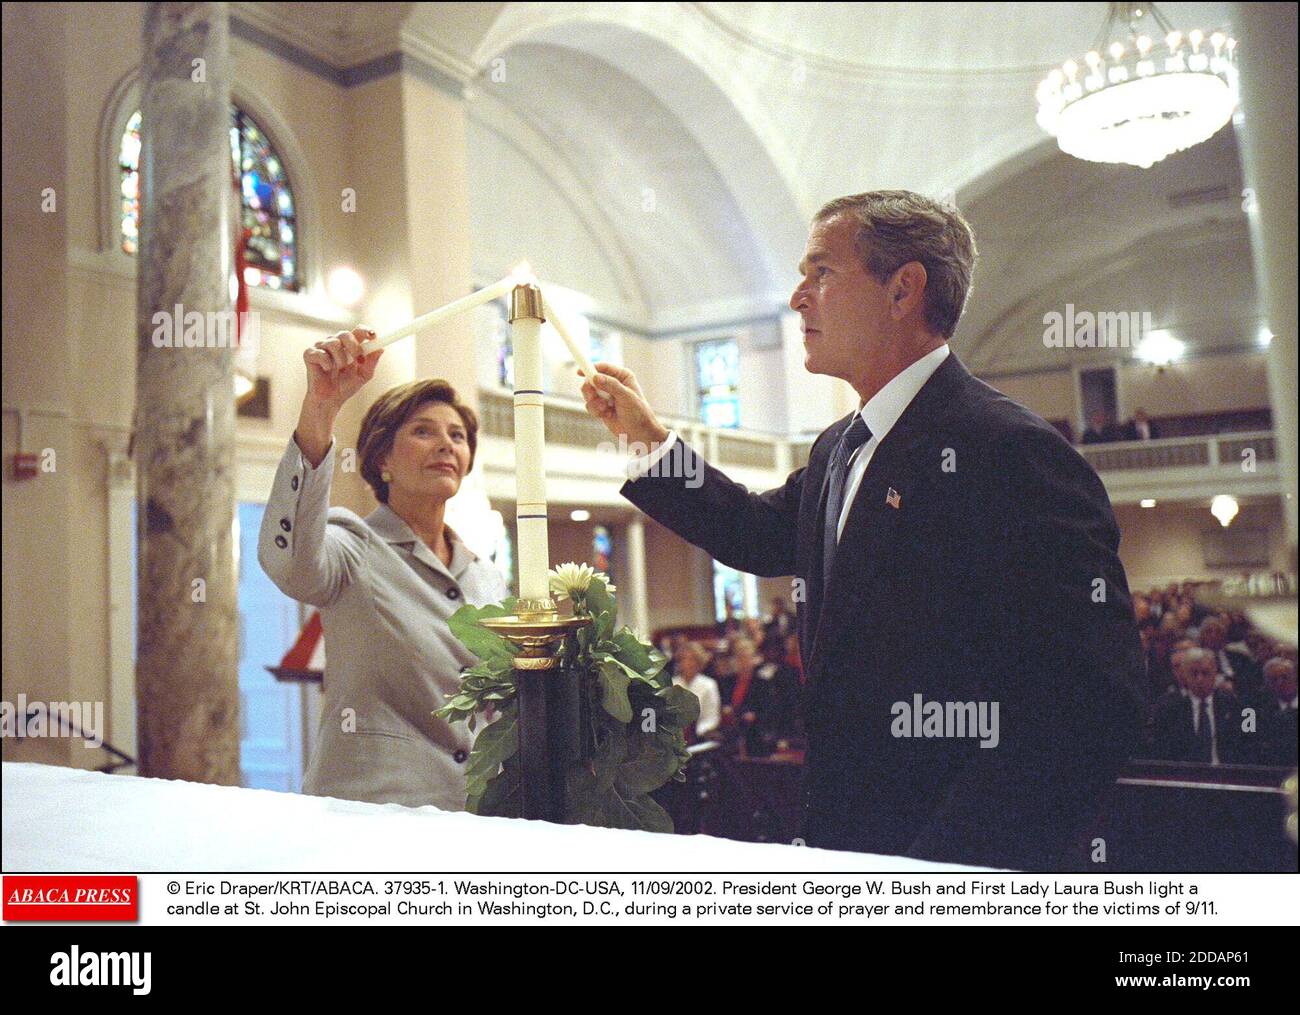 NO FILM, NO VIDEO, NO TV, NO DOCUMENTARY - © Eric Draper/KRT/ABACA. 37935-1. Washington-DC-USA, 11/09/2002. President George W. Bush and First Lady Laura Bush light a candle at St. John Episcopal Church in Washington, D.C., during a private service of prayer and remembrance for the victims of 9/11 Stock Photo